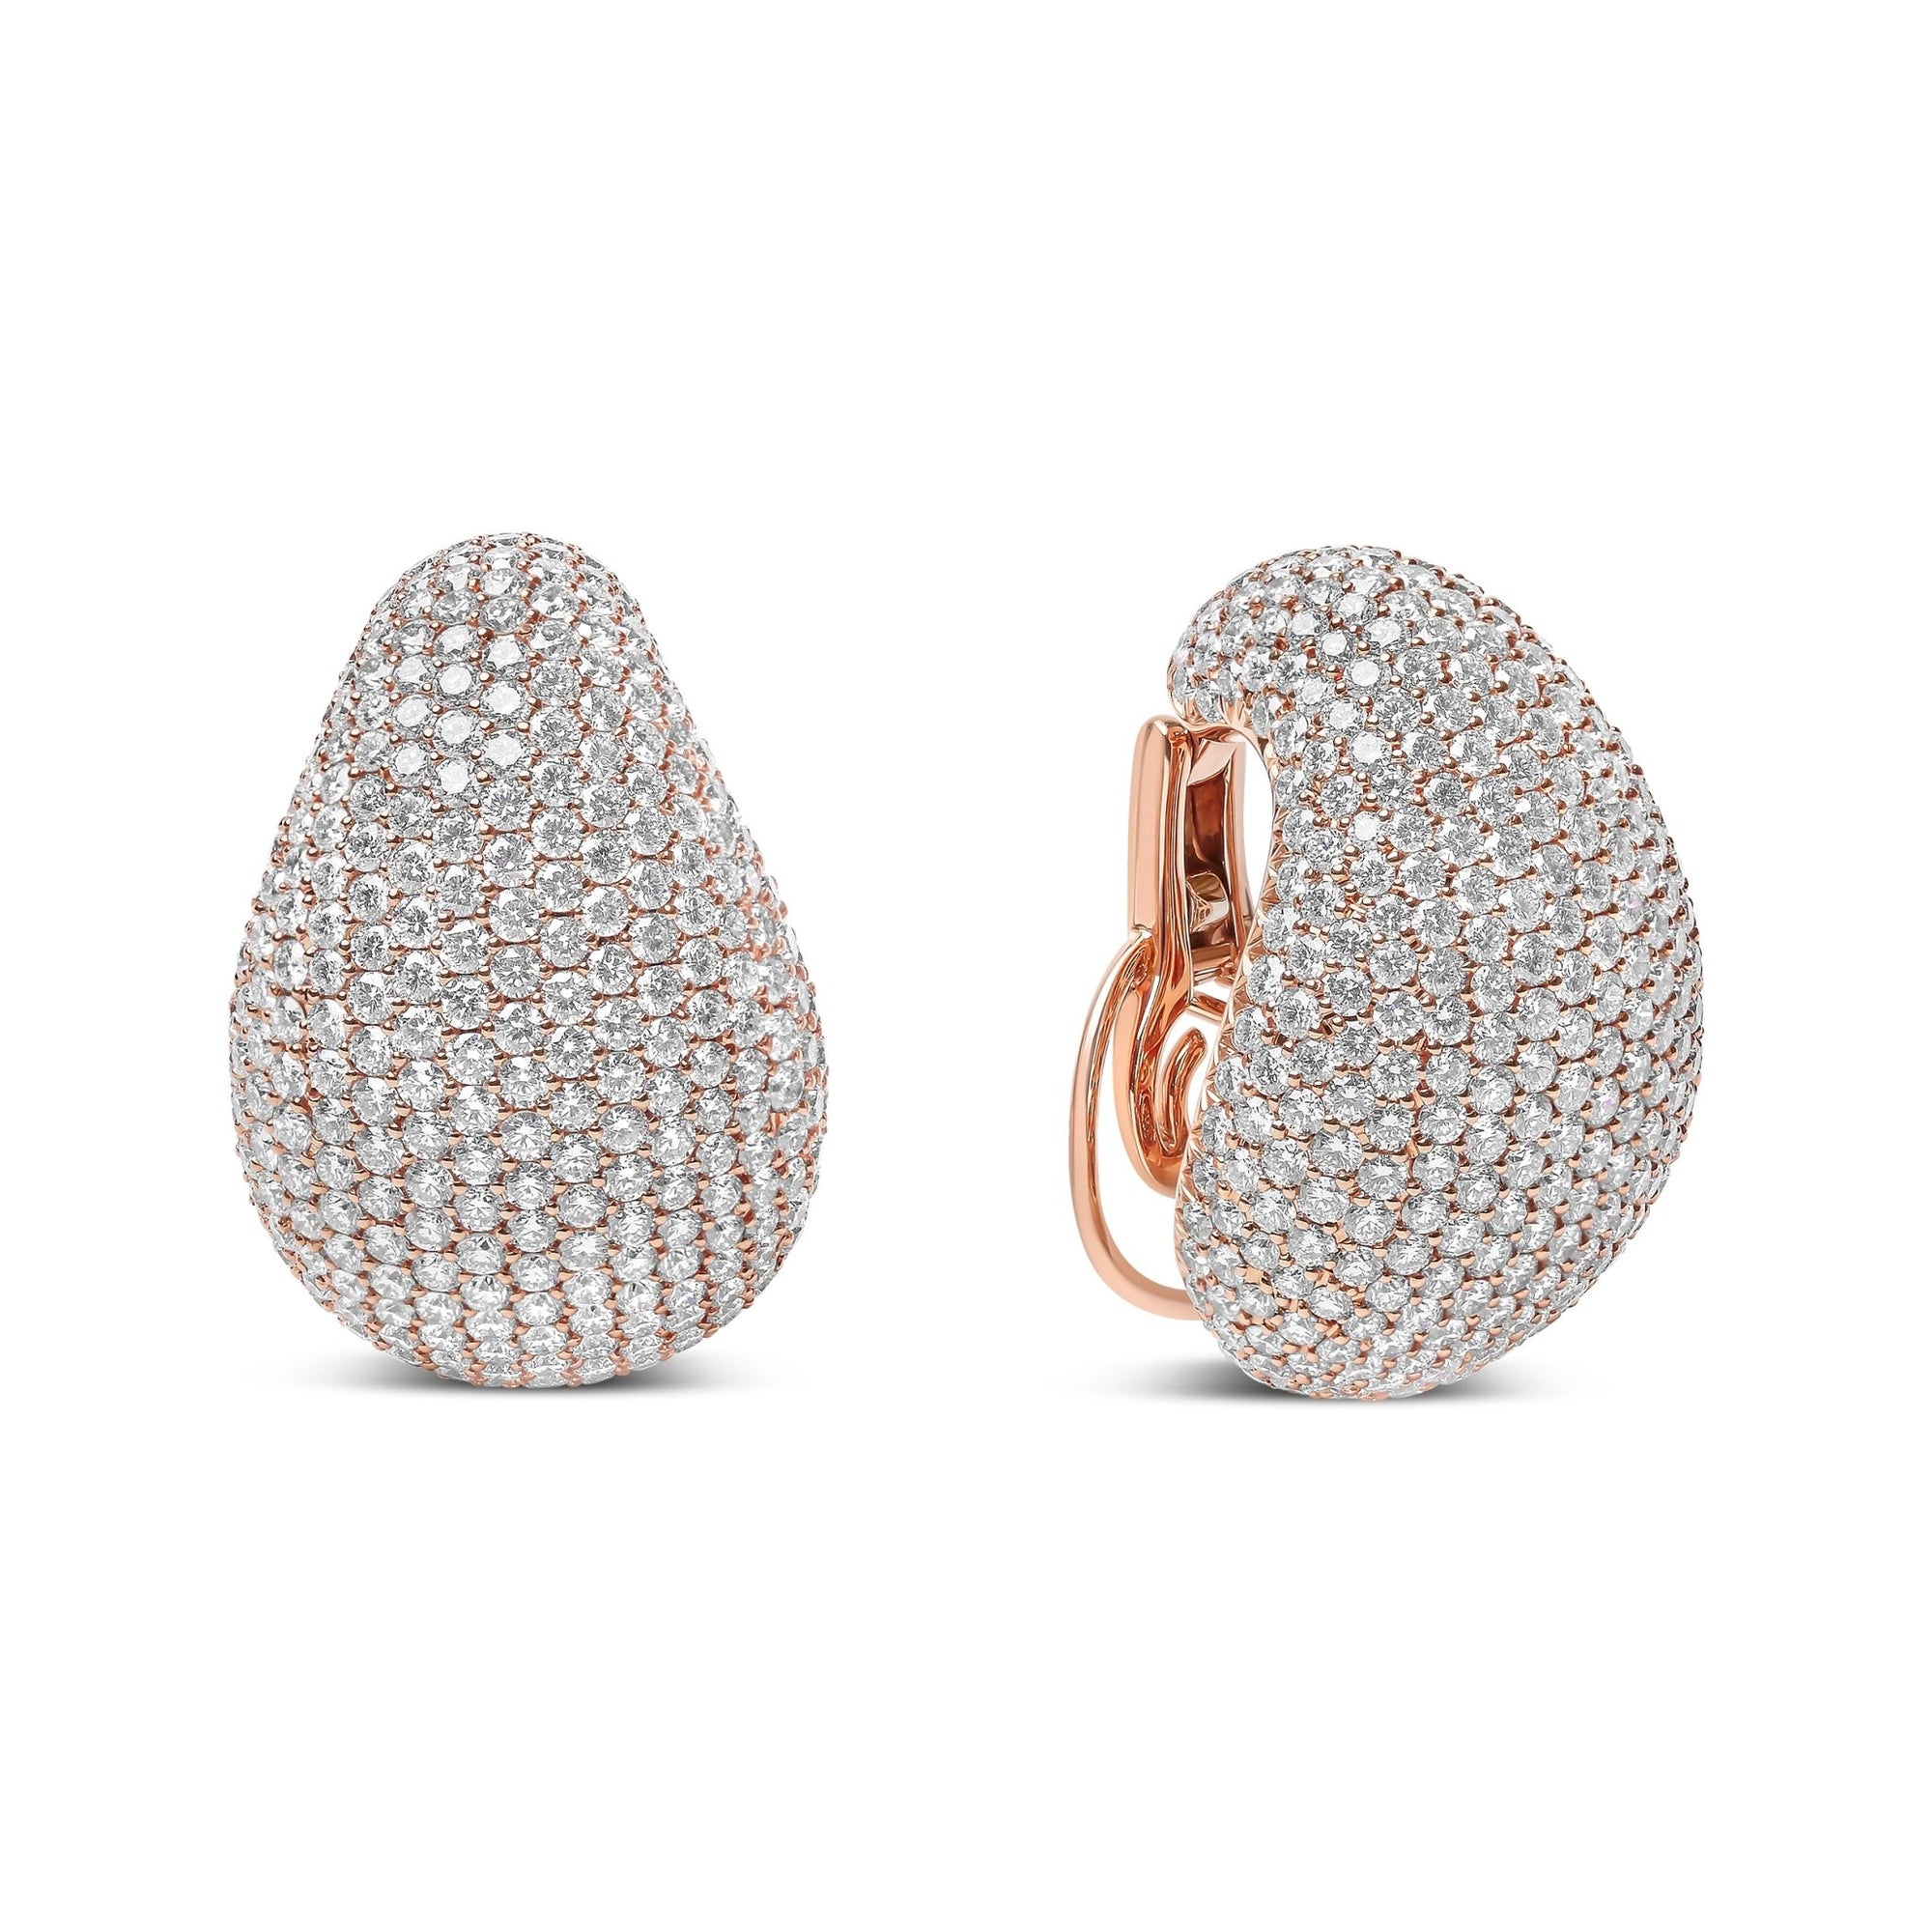 18K Rose Gold 13 1/5 Cttw Micro-Pave Diamond Sculptural Design Statement Omega Back Earrings (G-H Color, SI1-SI2 Clarity) - LinkagejewelrydesignLinkagejewelrydesign